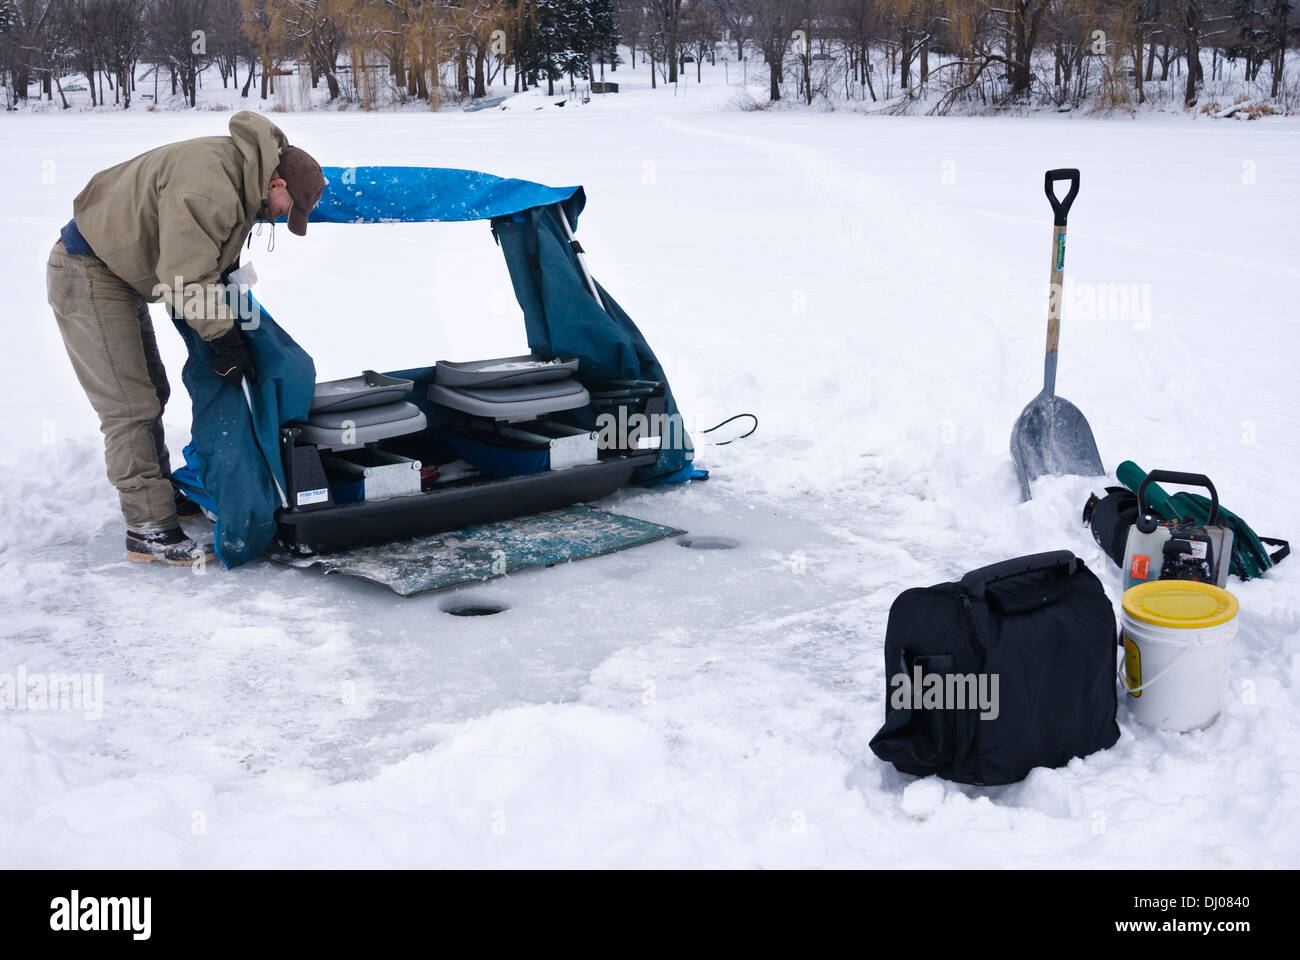 Man breaks down his temporary ice fishing shack on a frozen lake